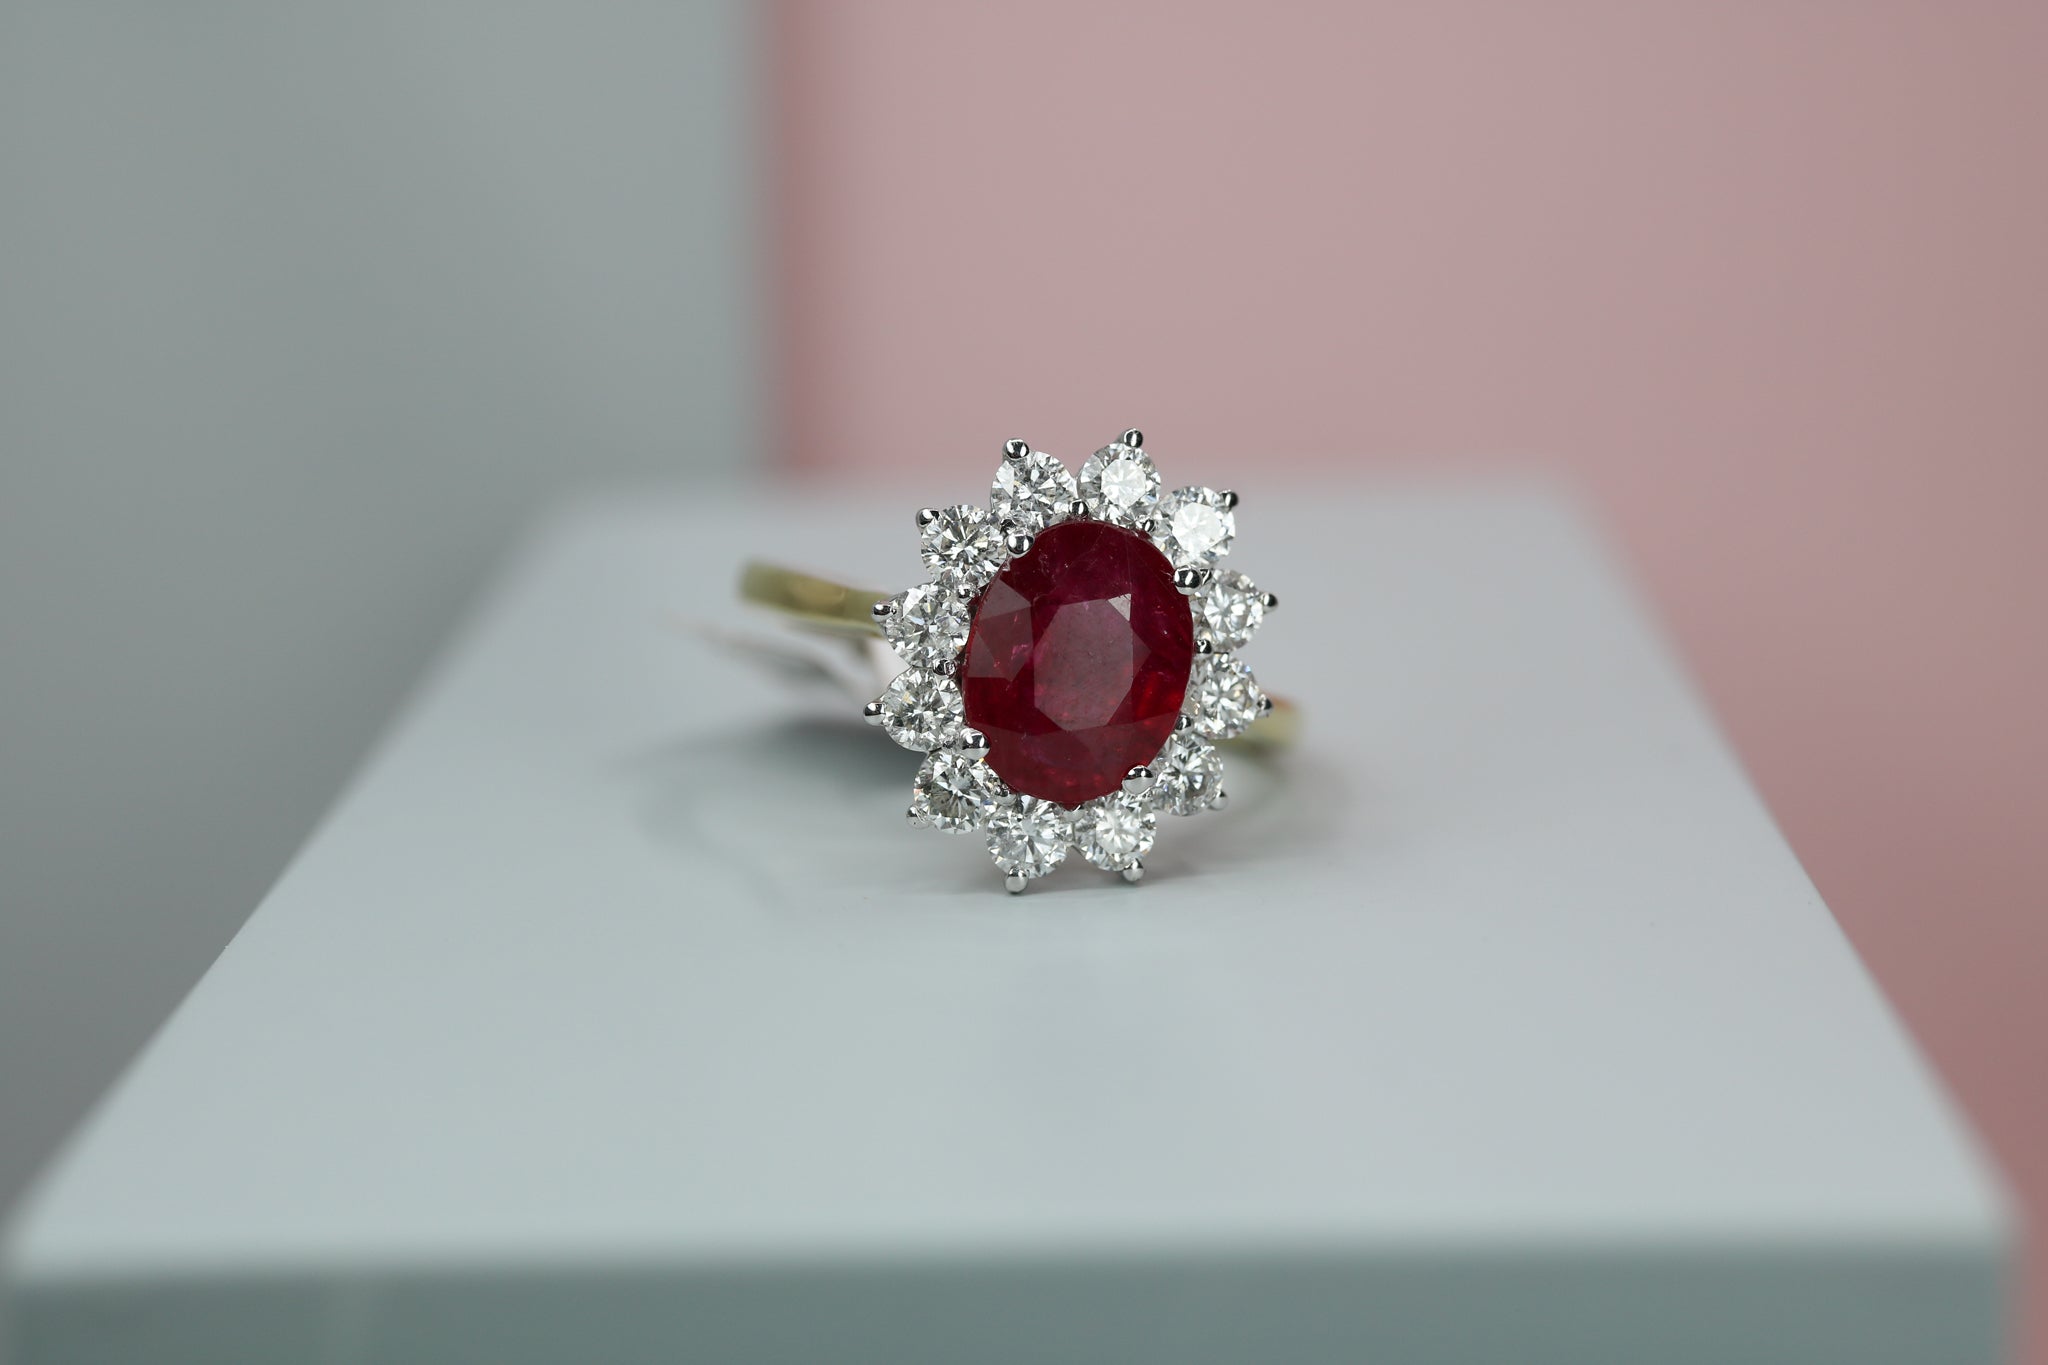 18ct Yellow Gold Diamond & Ruby Cluster Ring - HJ2076 - Hallmark Jewellers Formby & The Jewellers Bench Widnes